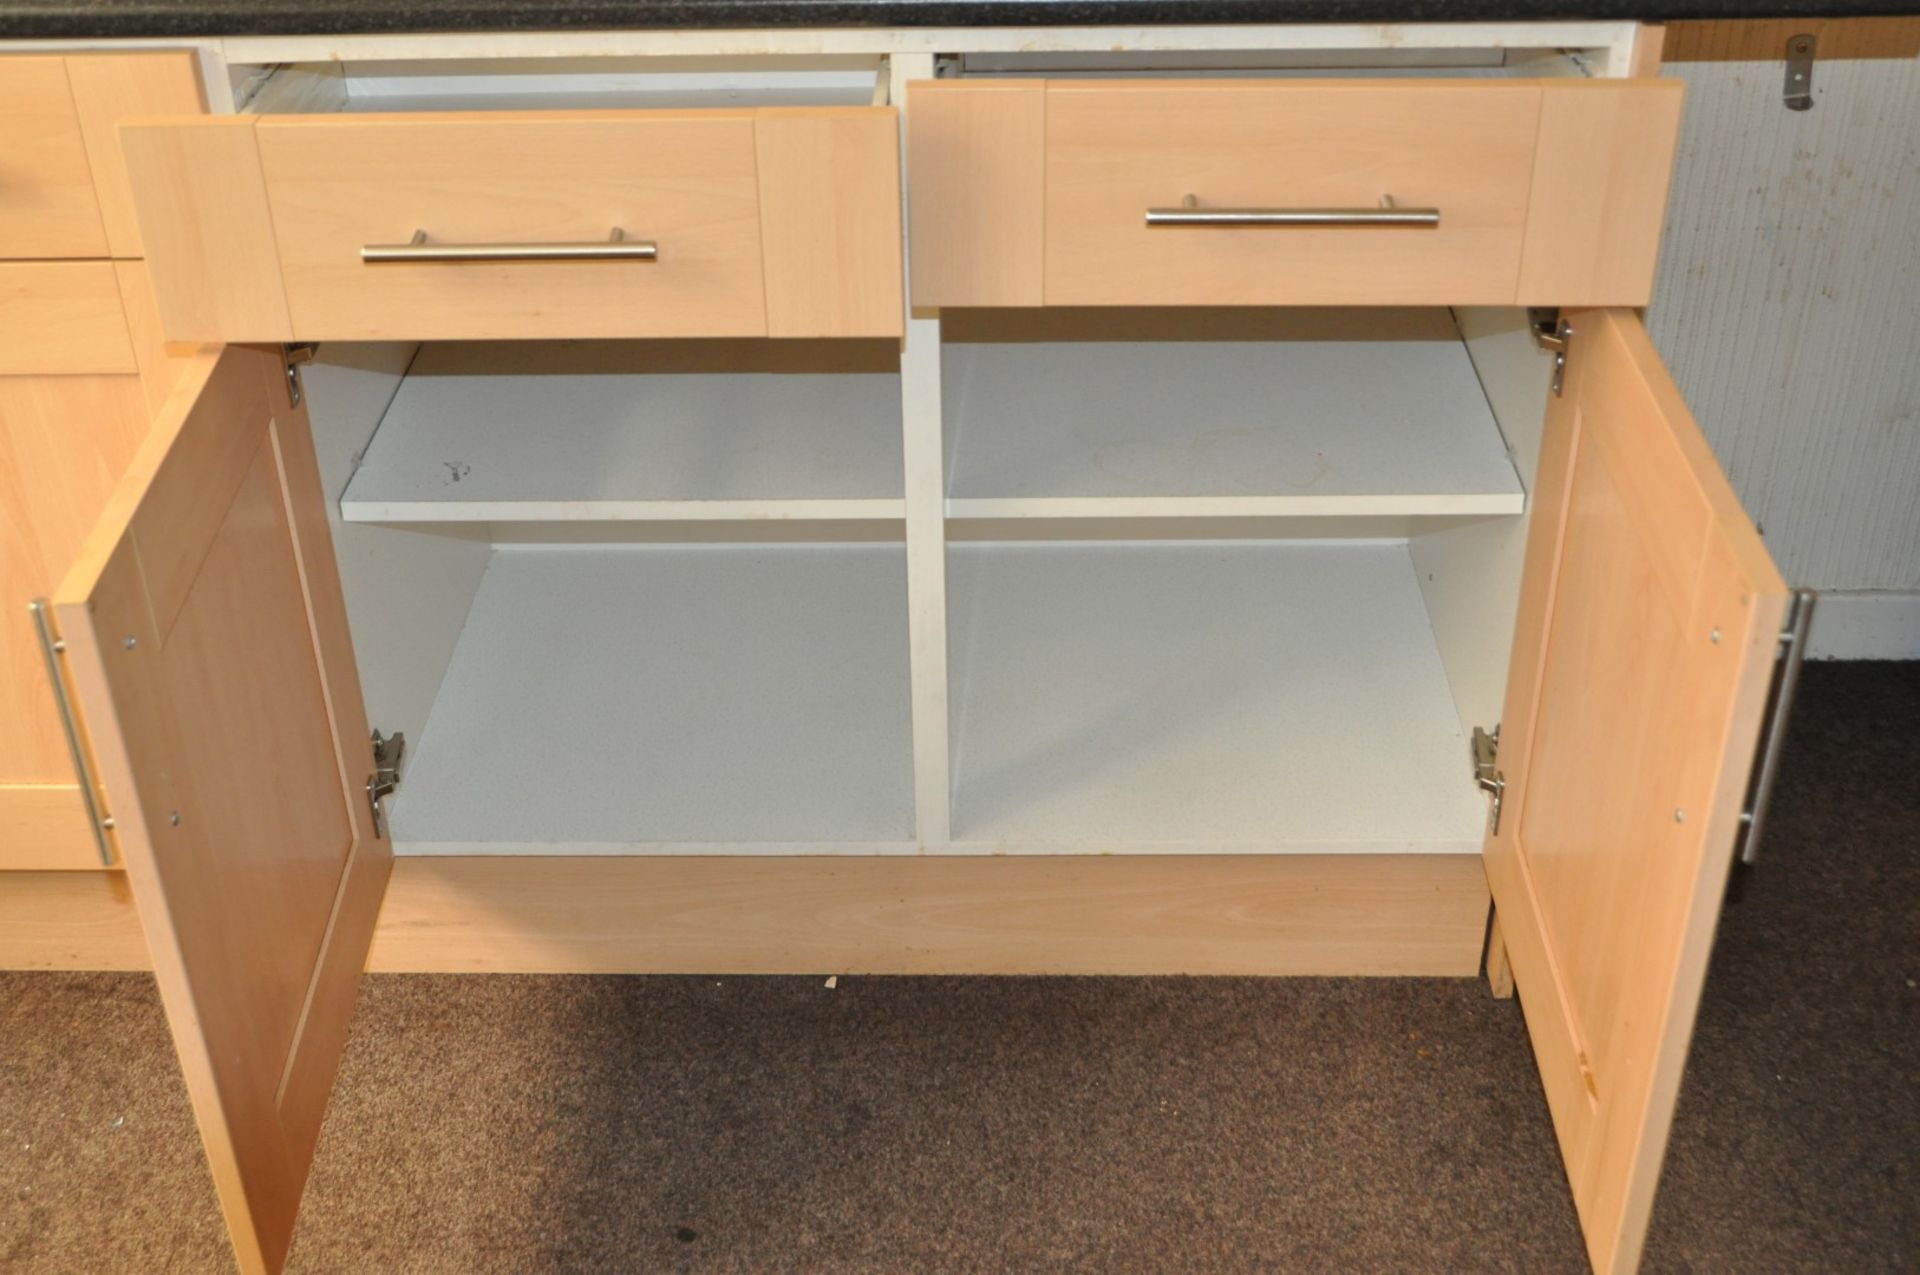 1 x Selection of Fitted Kitchen Units With Beech Shaker Style Doors and Worktop - Ideal For - Image 2 of 7